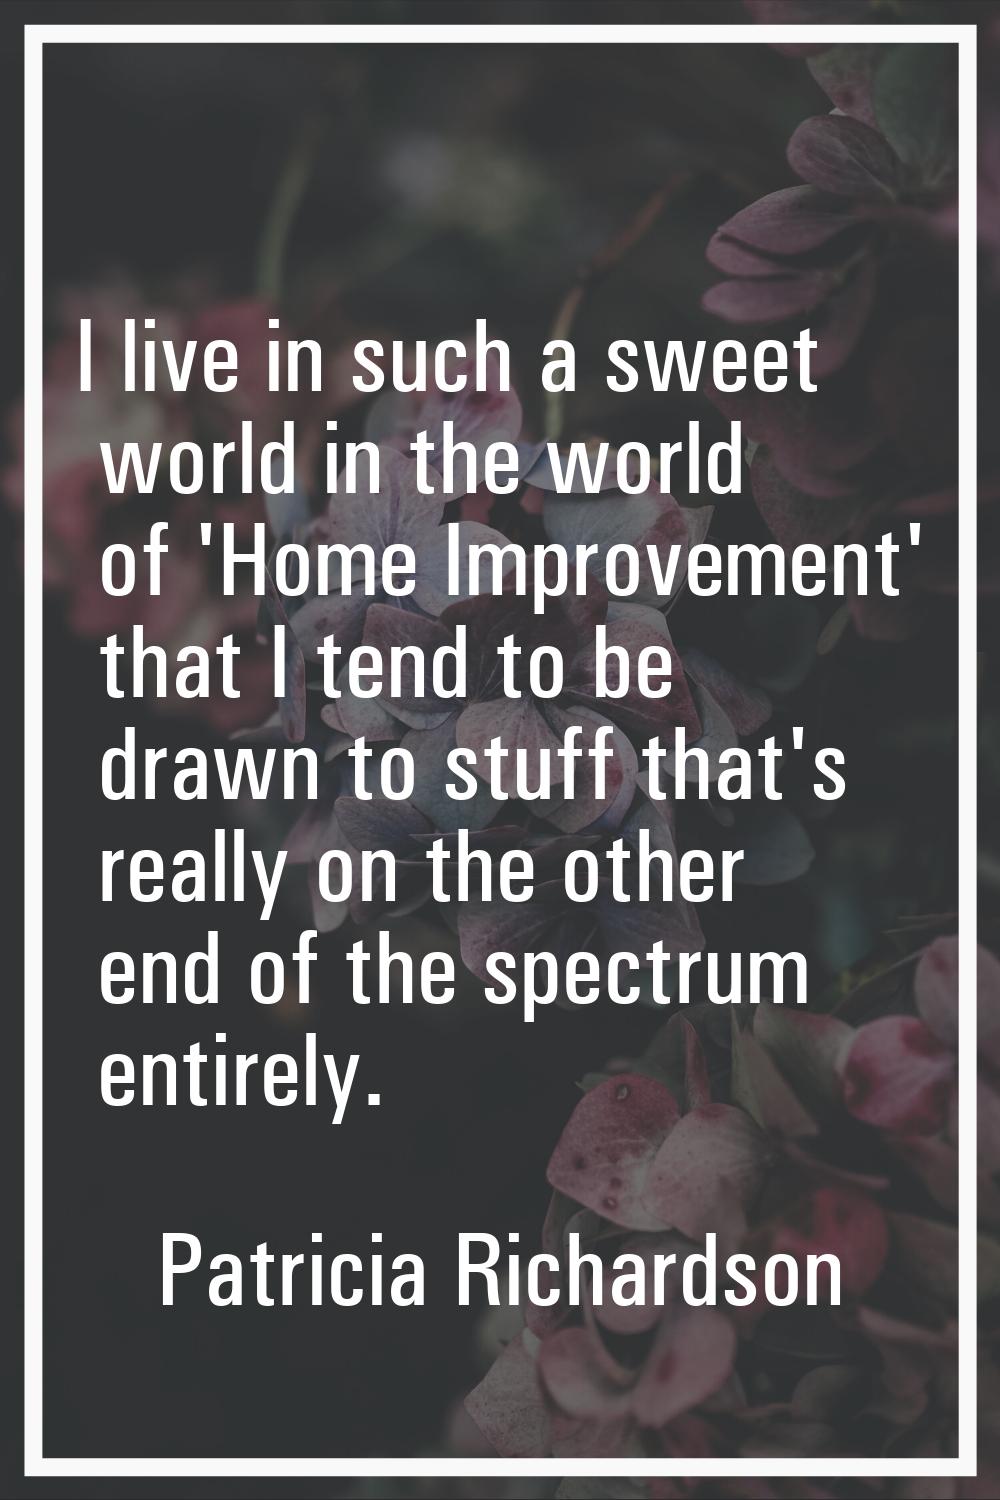 I live in such a sweet world in the world of 'Home Improvement' that I tend to be drawn to stuff th